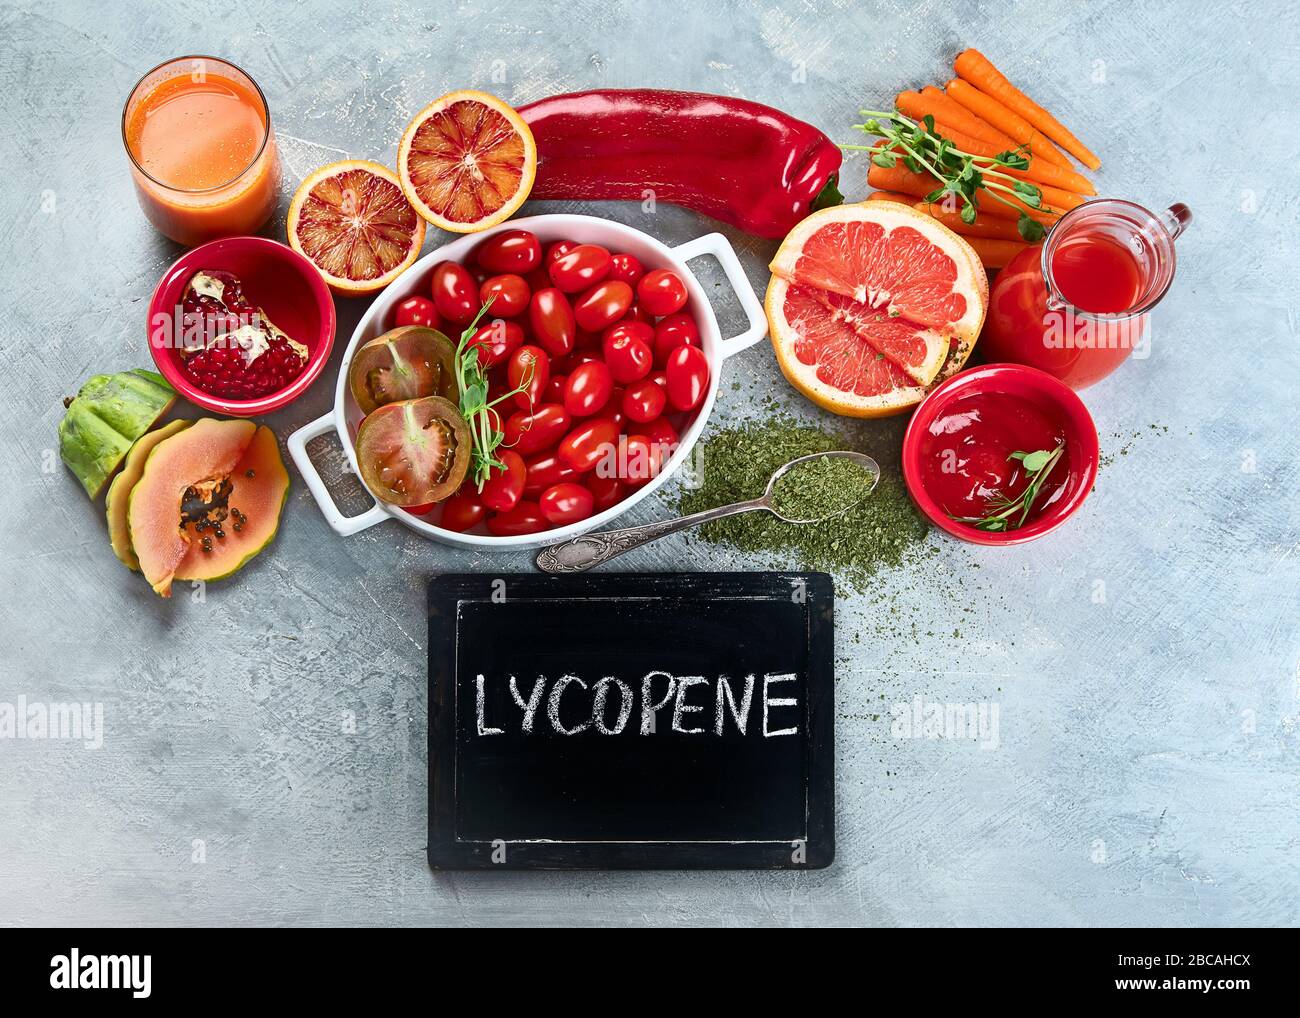 Foods Highest in Lycopene. Healthy food with antioxidants and vitamins Stock Photo